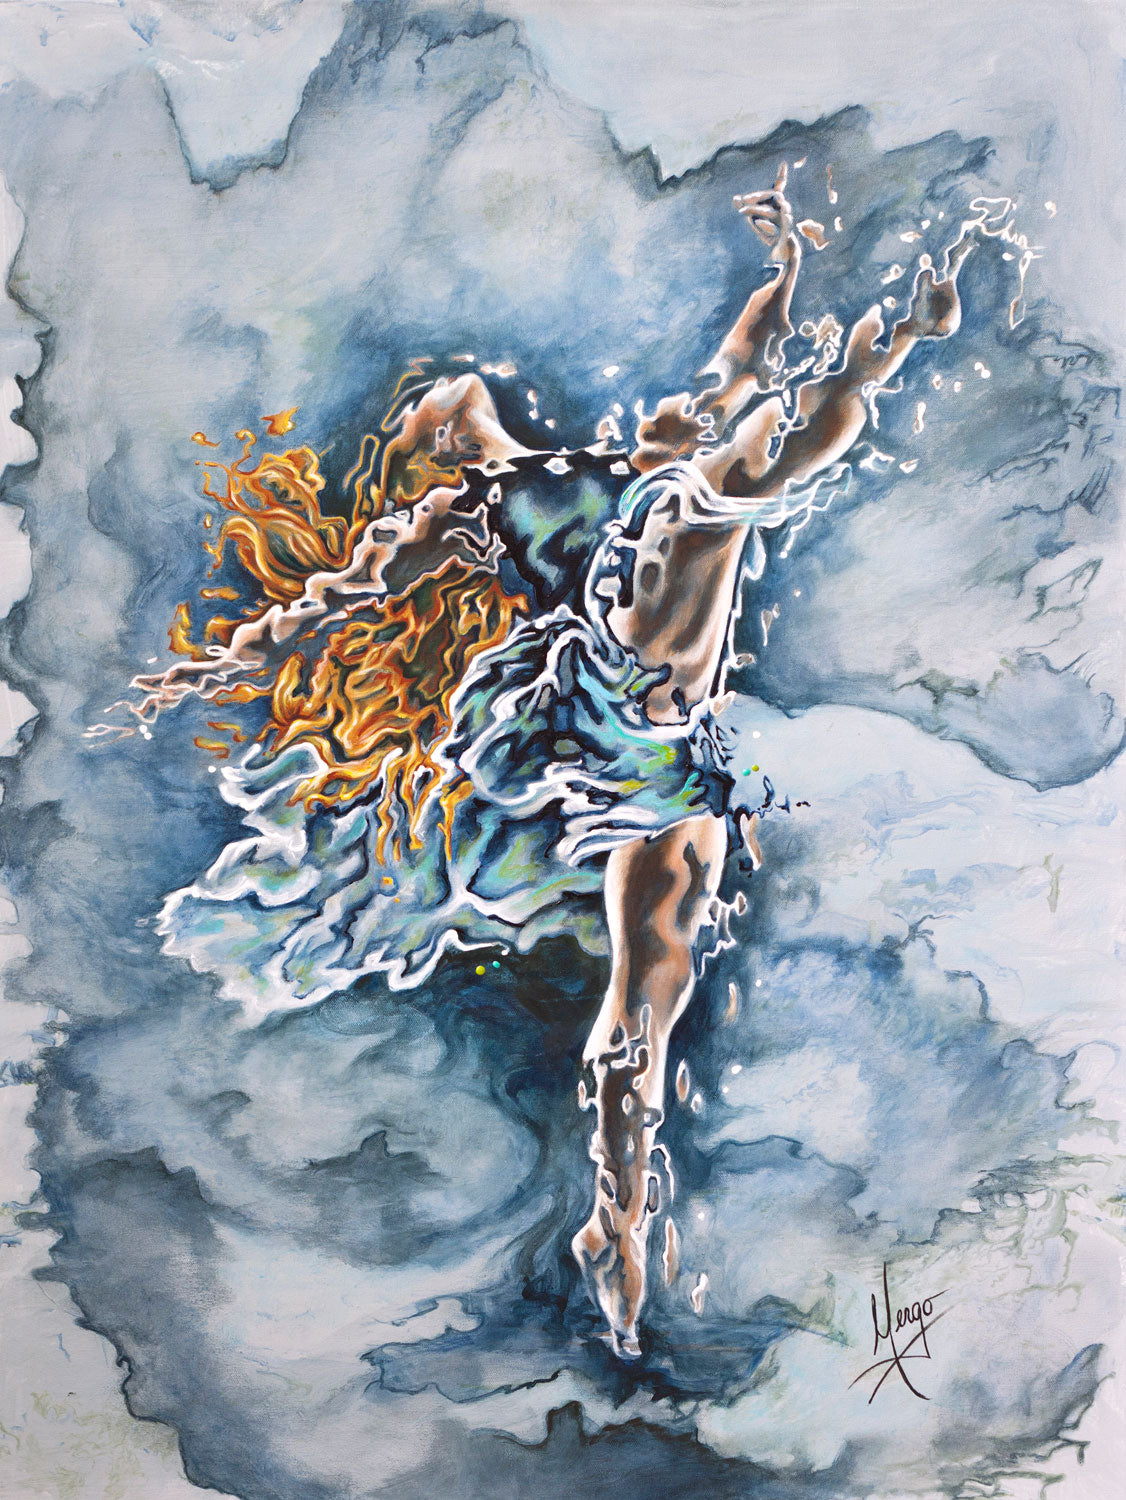 "Believe" figurative painting of a woman dancer in blue